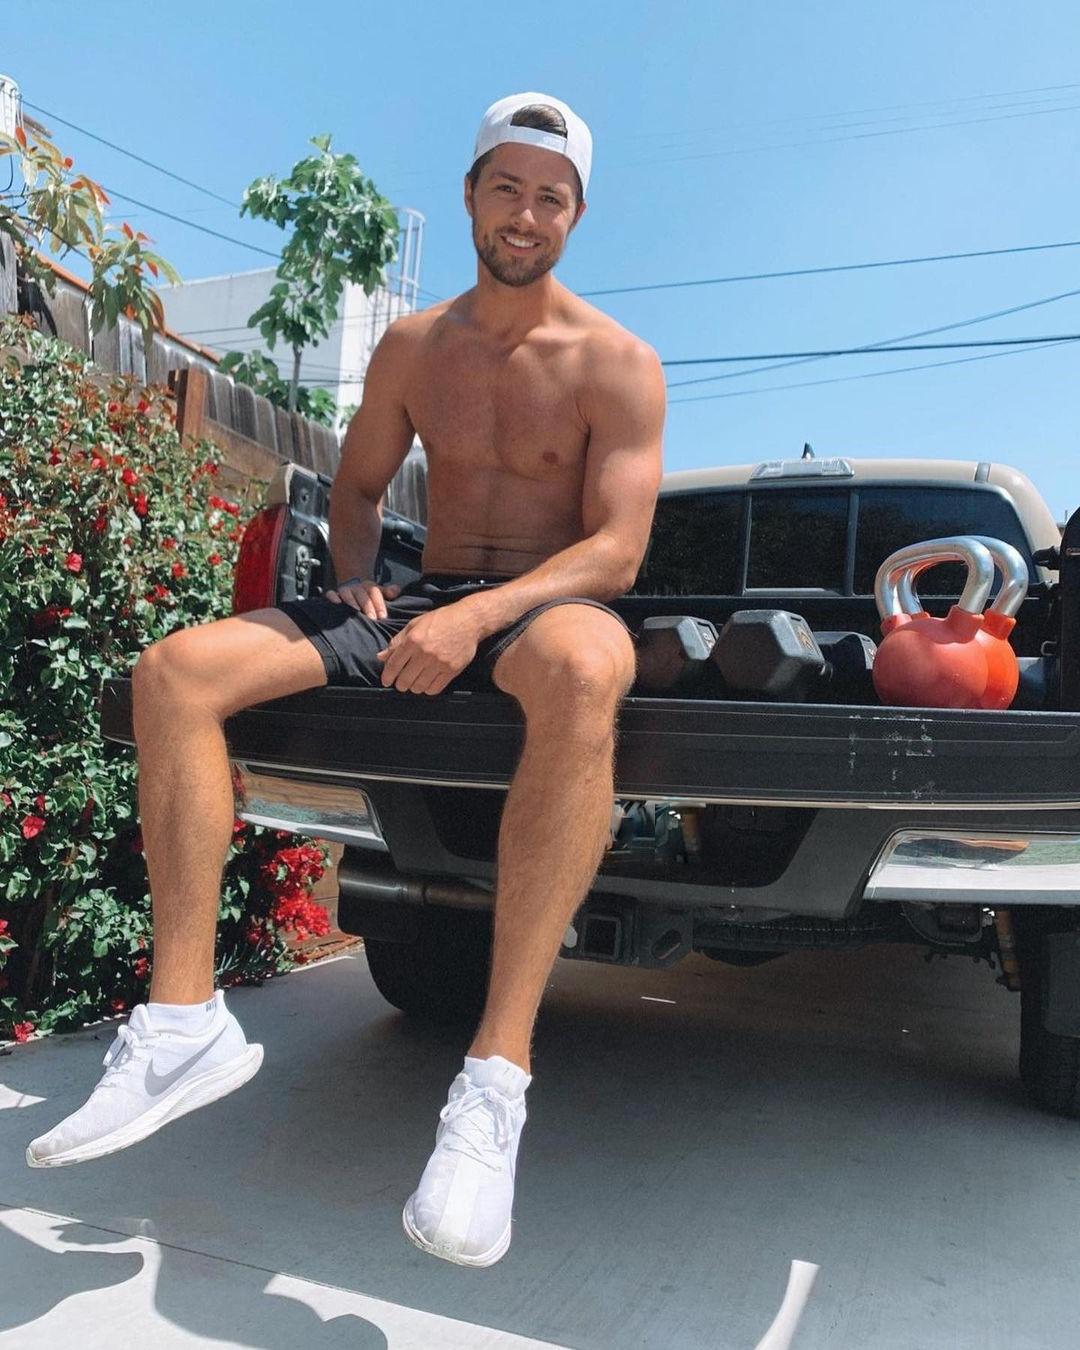 cute-hairy-bare-chest-boy-next-door-car-sitting-smiling-summer